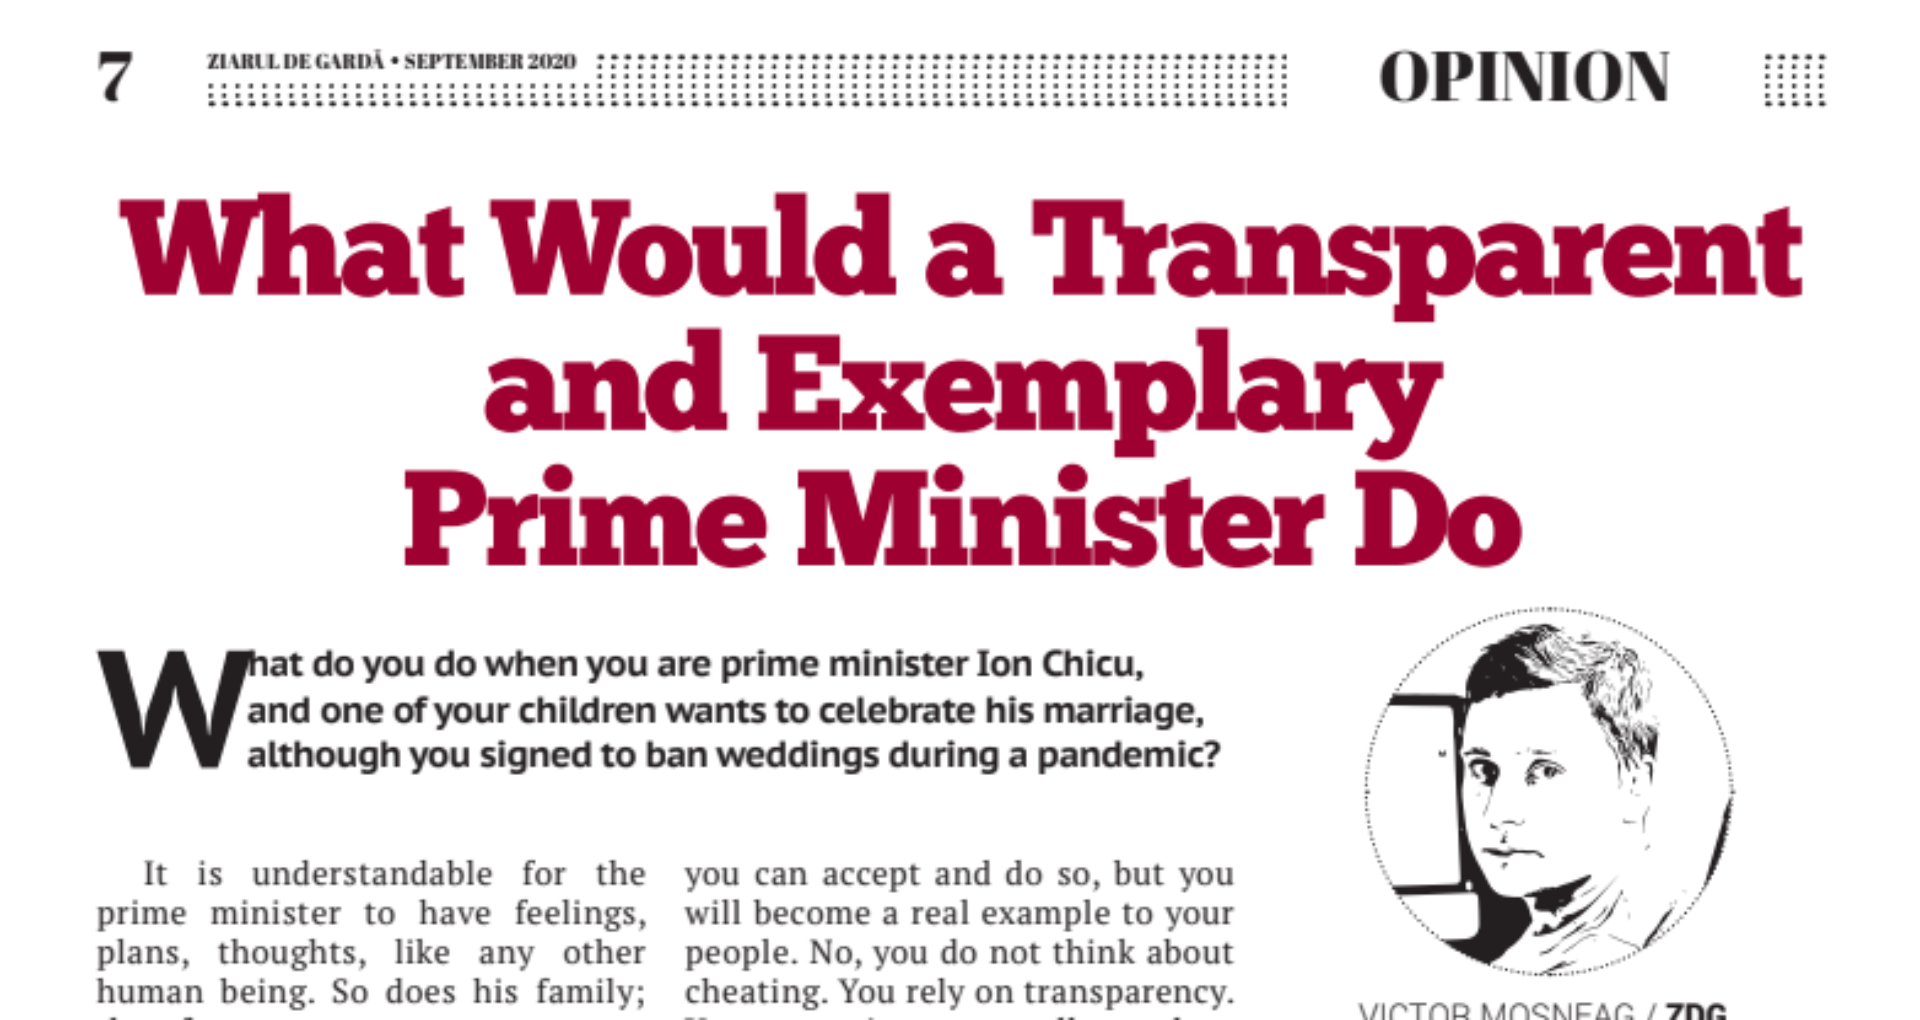 What Would a Transparent and Exemplary Prime Minister Do